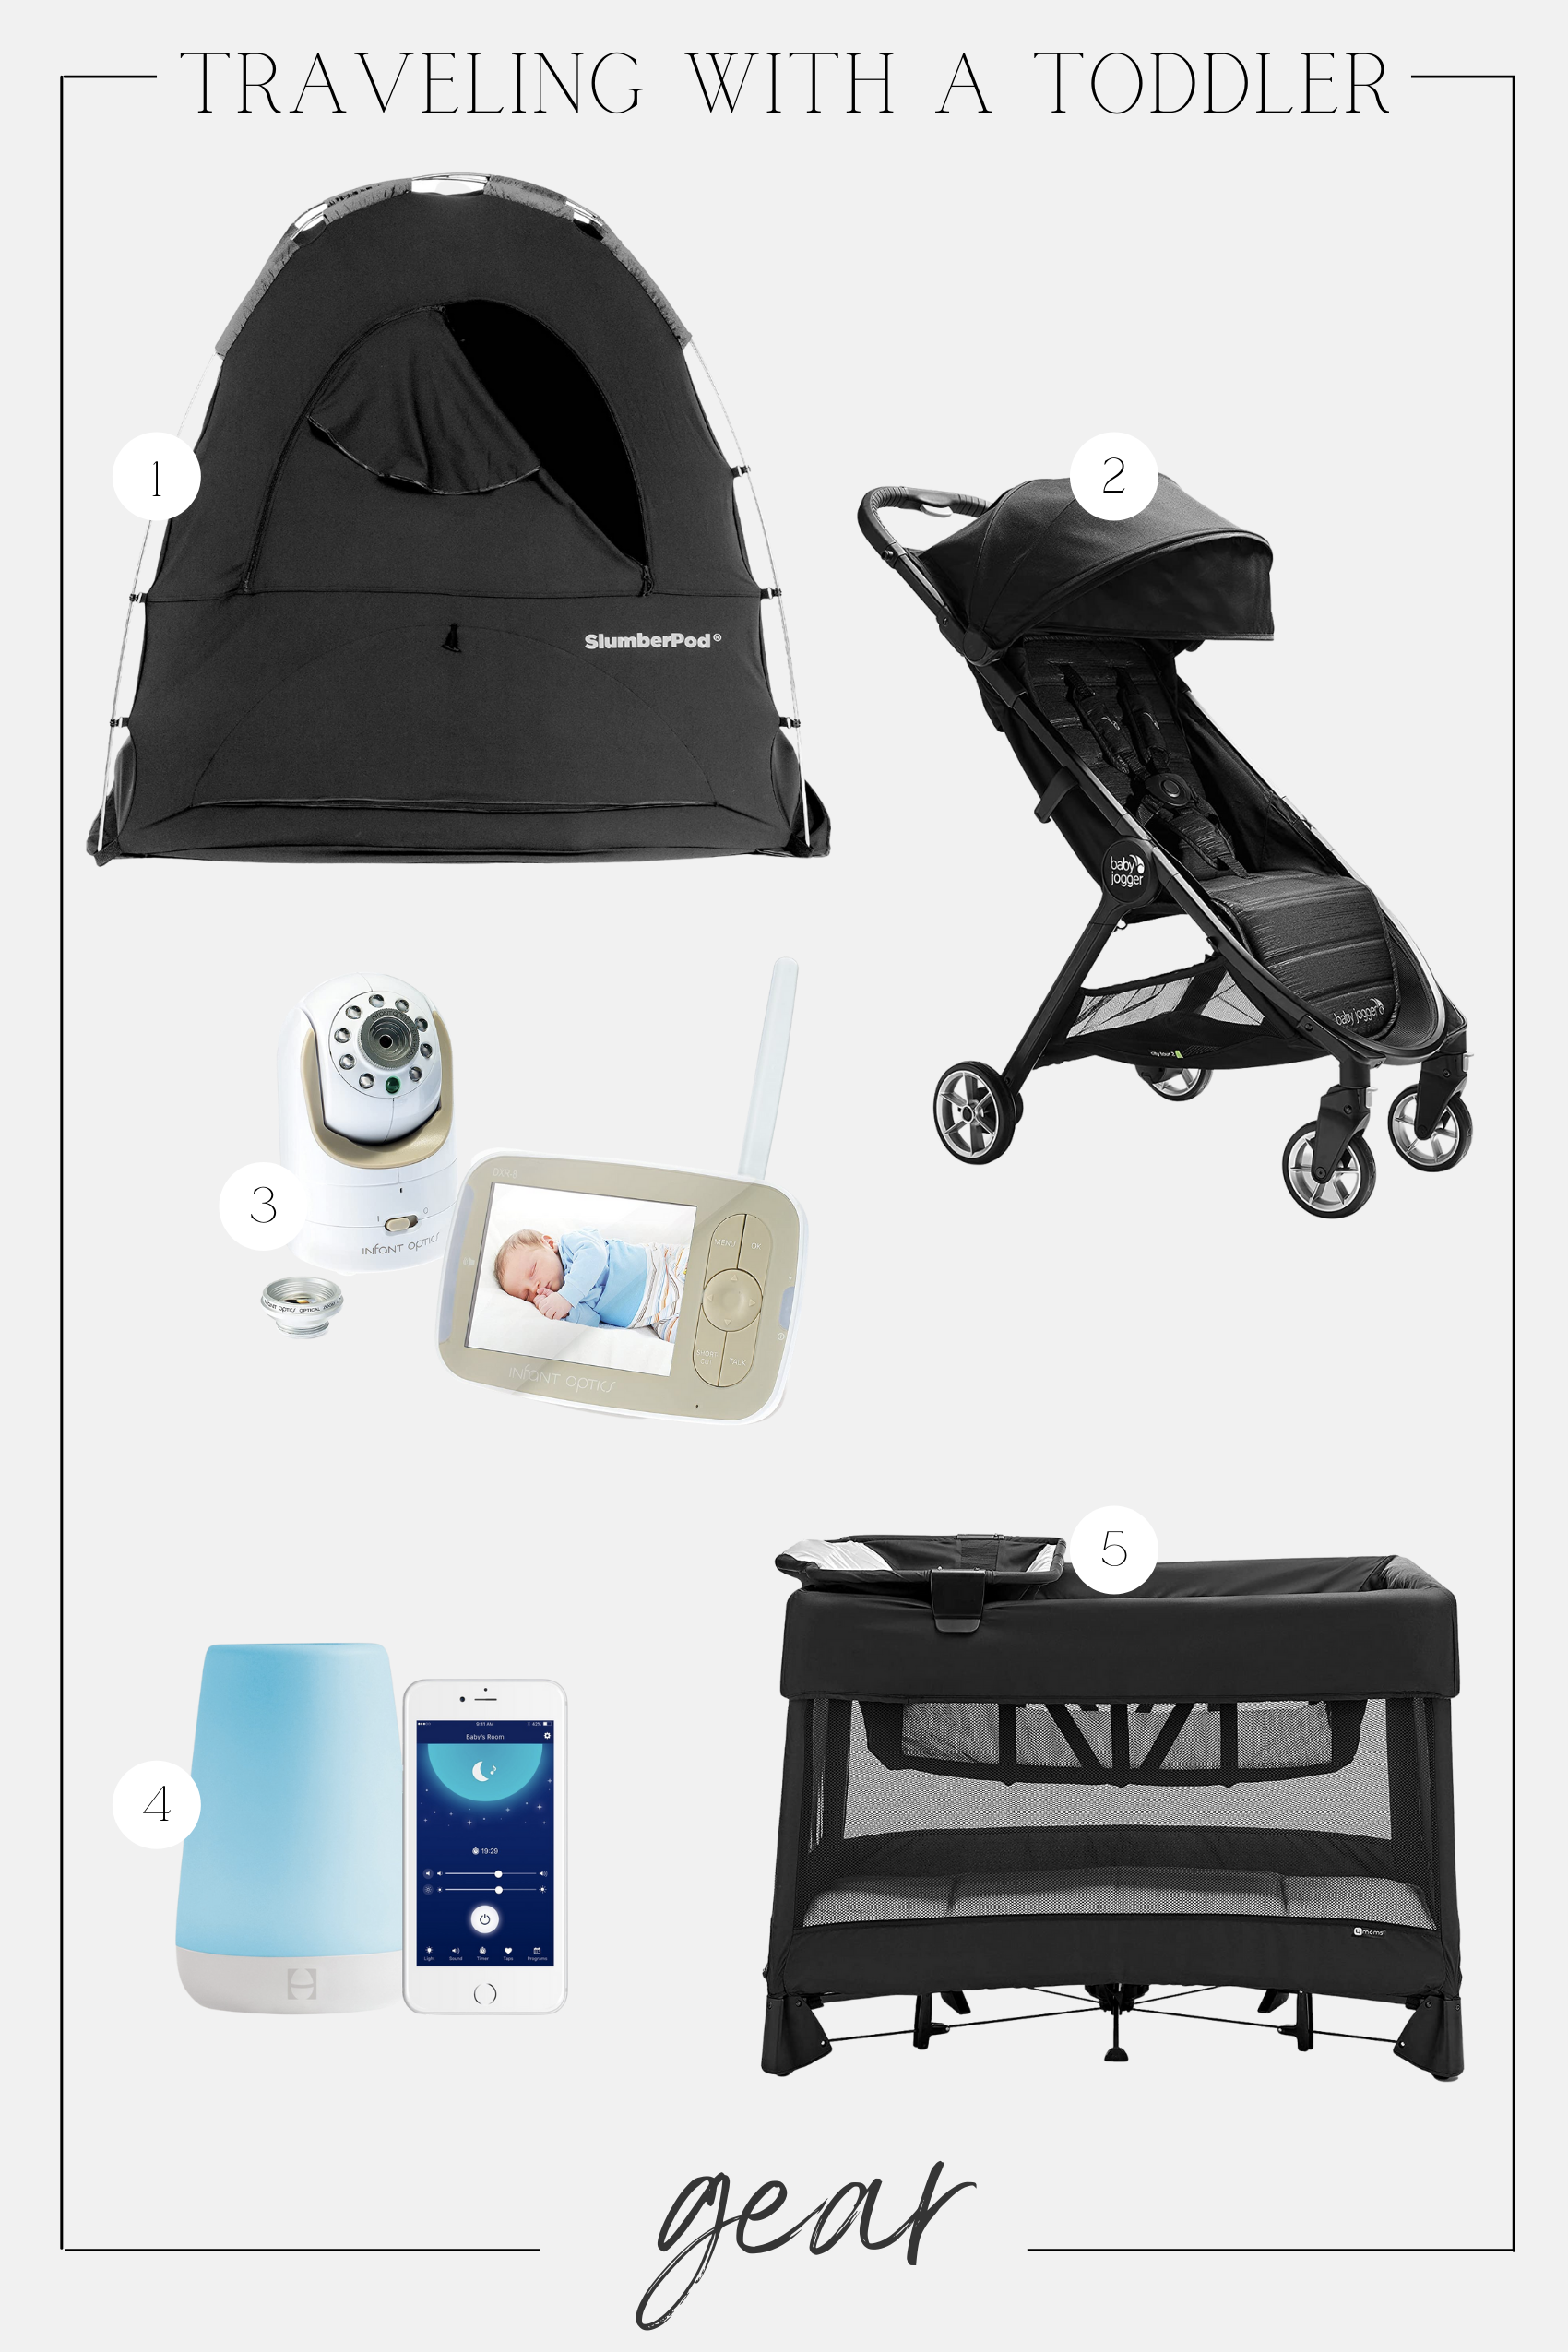 Gear for traveling with a toddler graphic